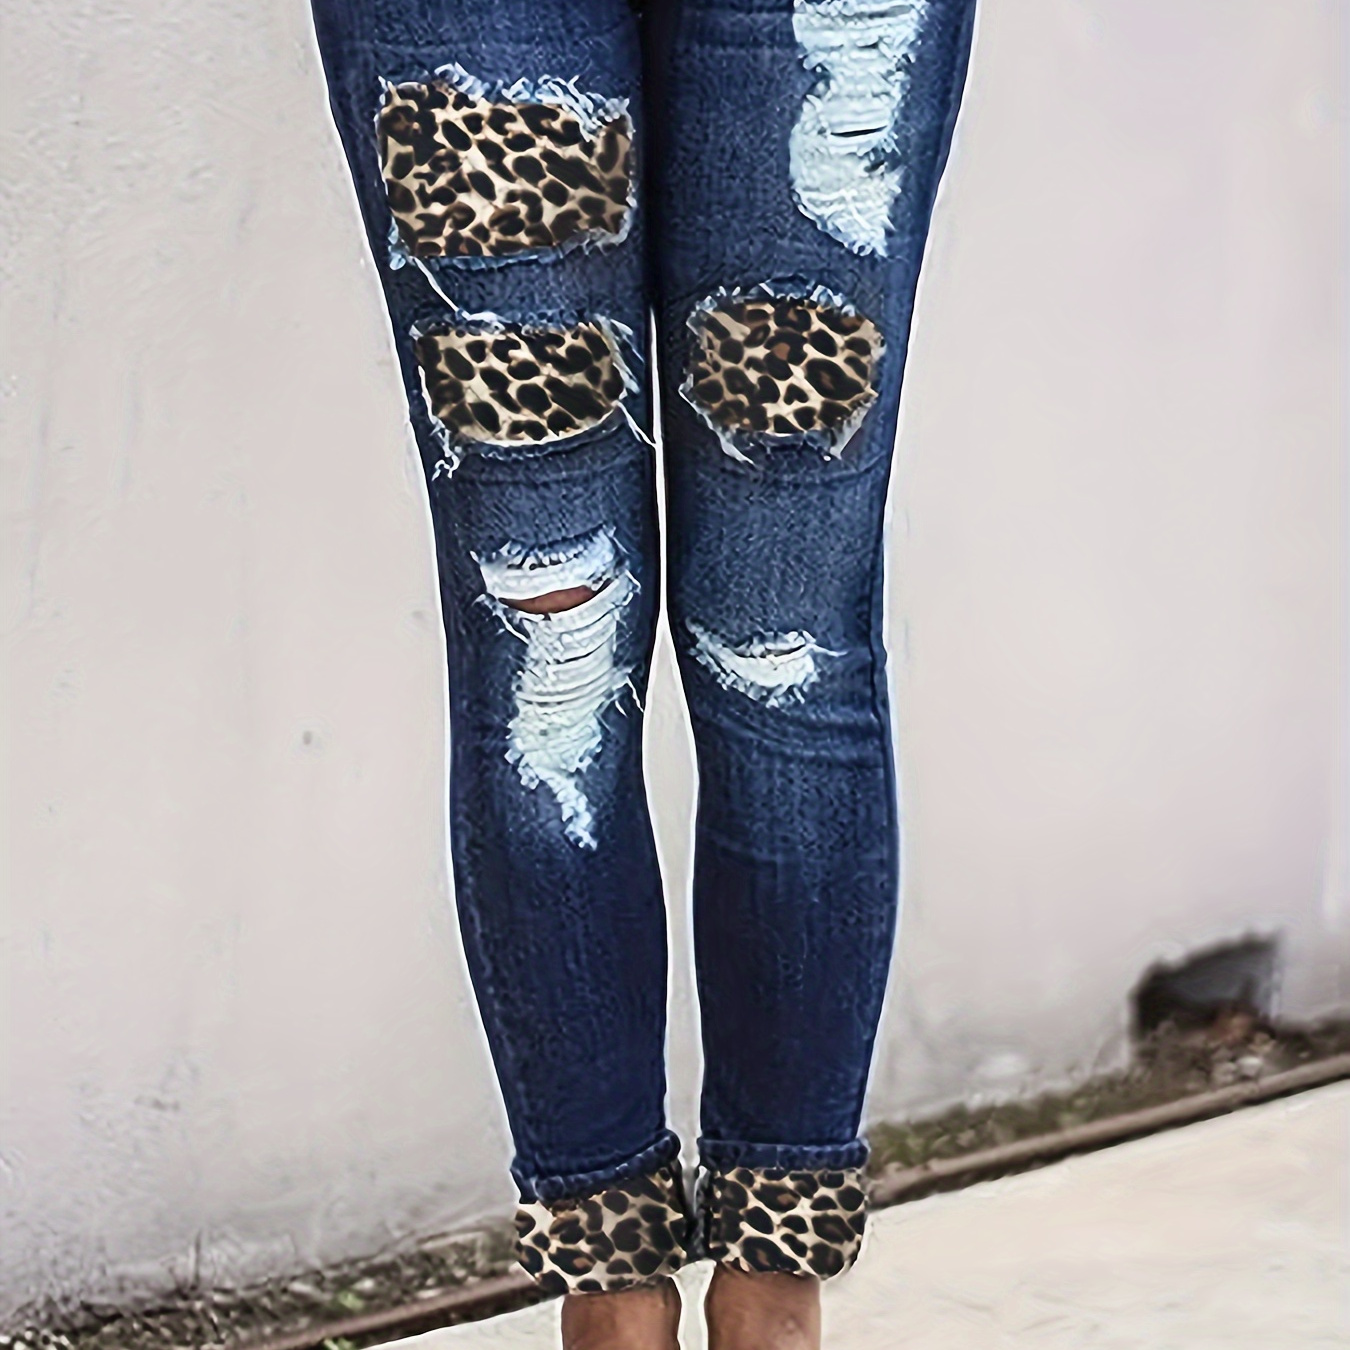 

Leopard Print Ripped Patchwork Jeans, Distressed Whiskering Skinny Fit Denim Pants, Women's Denim Jeans & Clothing